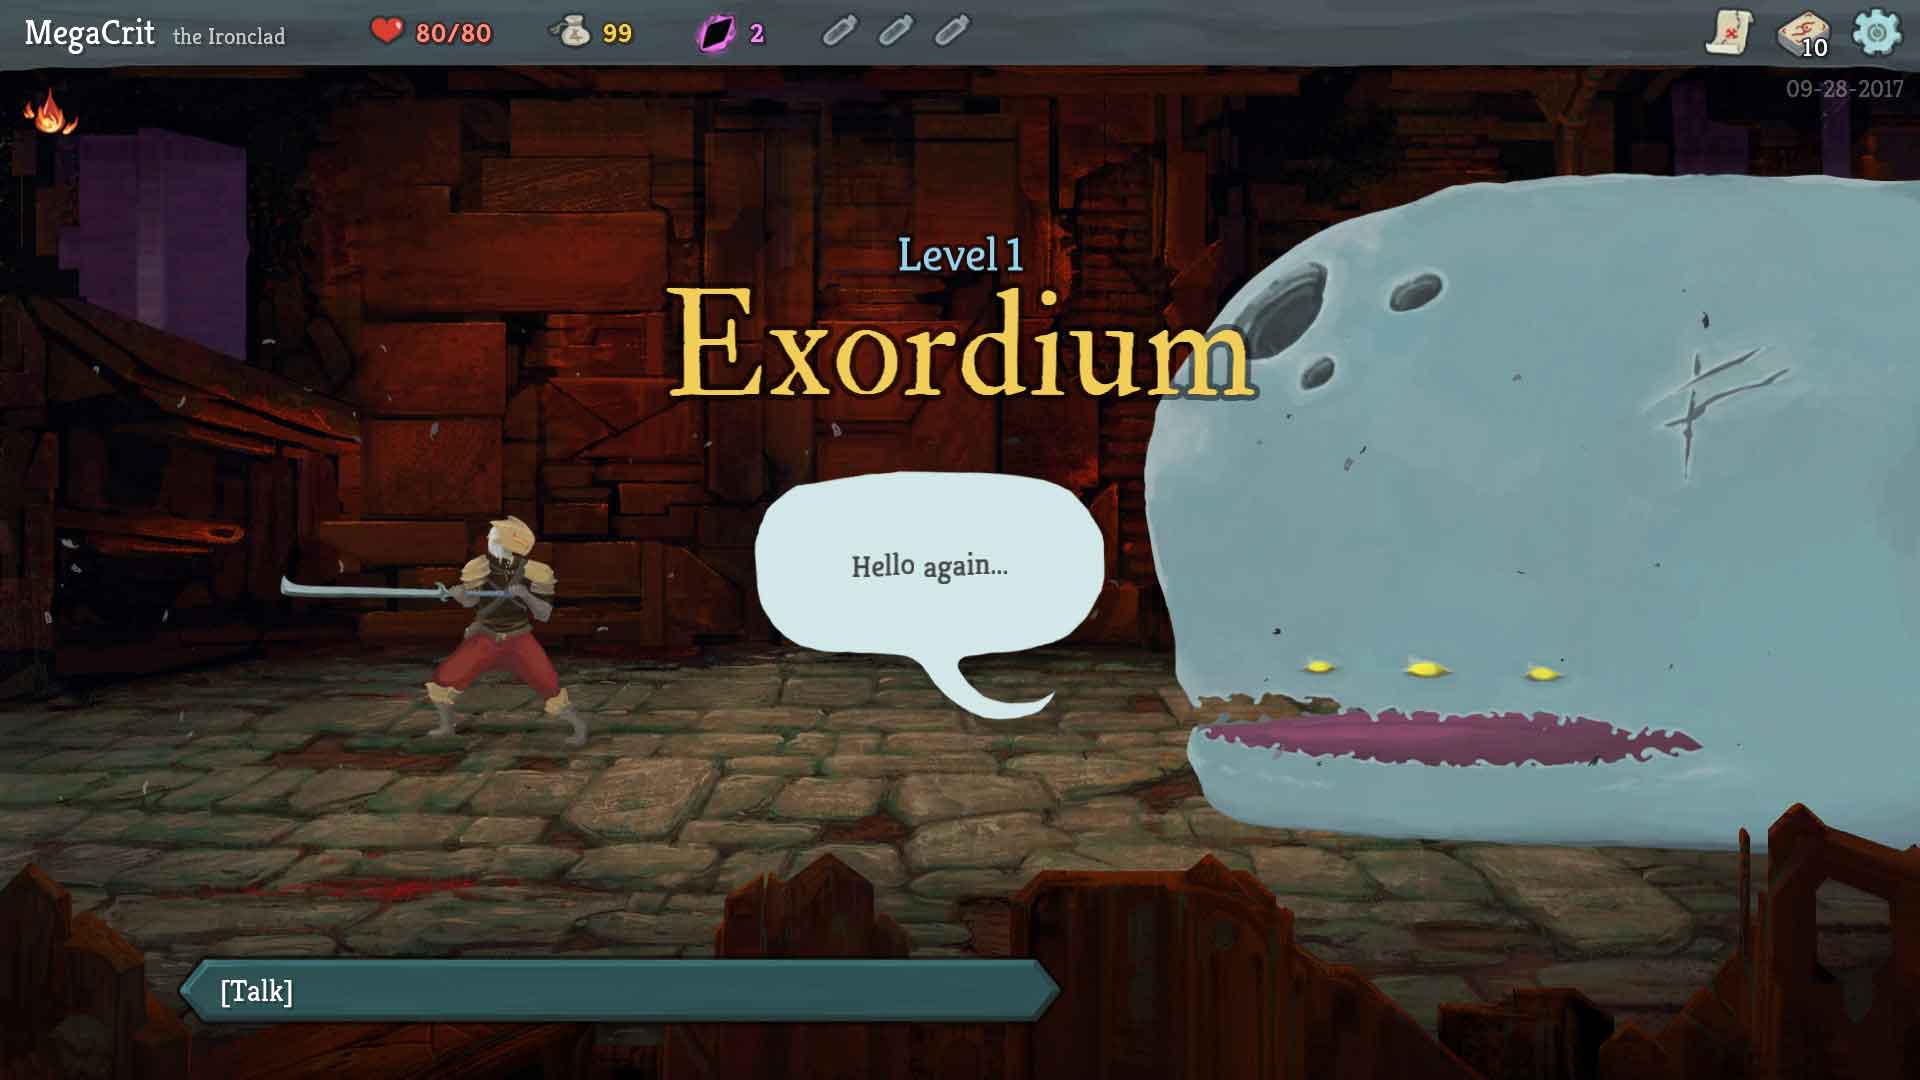 download akabeko slay the spire